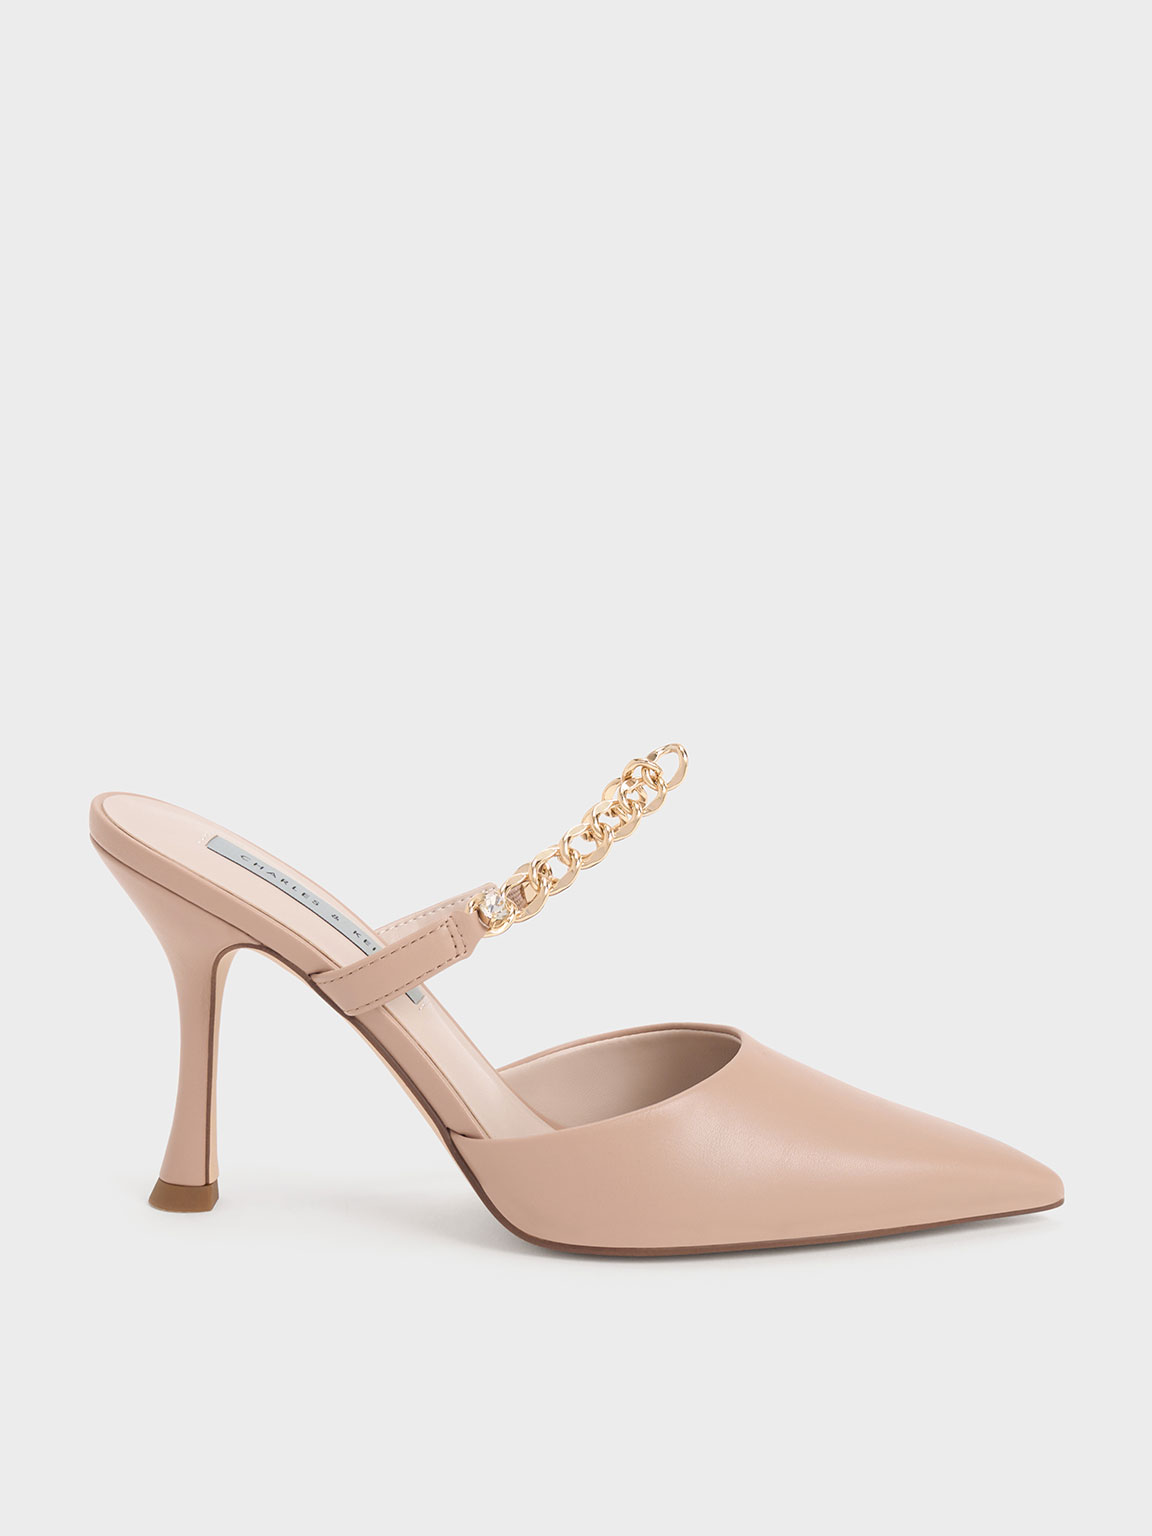 Nude Chain-Link Strap Heeled Mules - CHARLES & KEITH MY